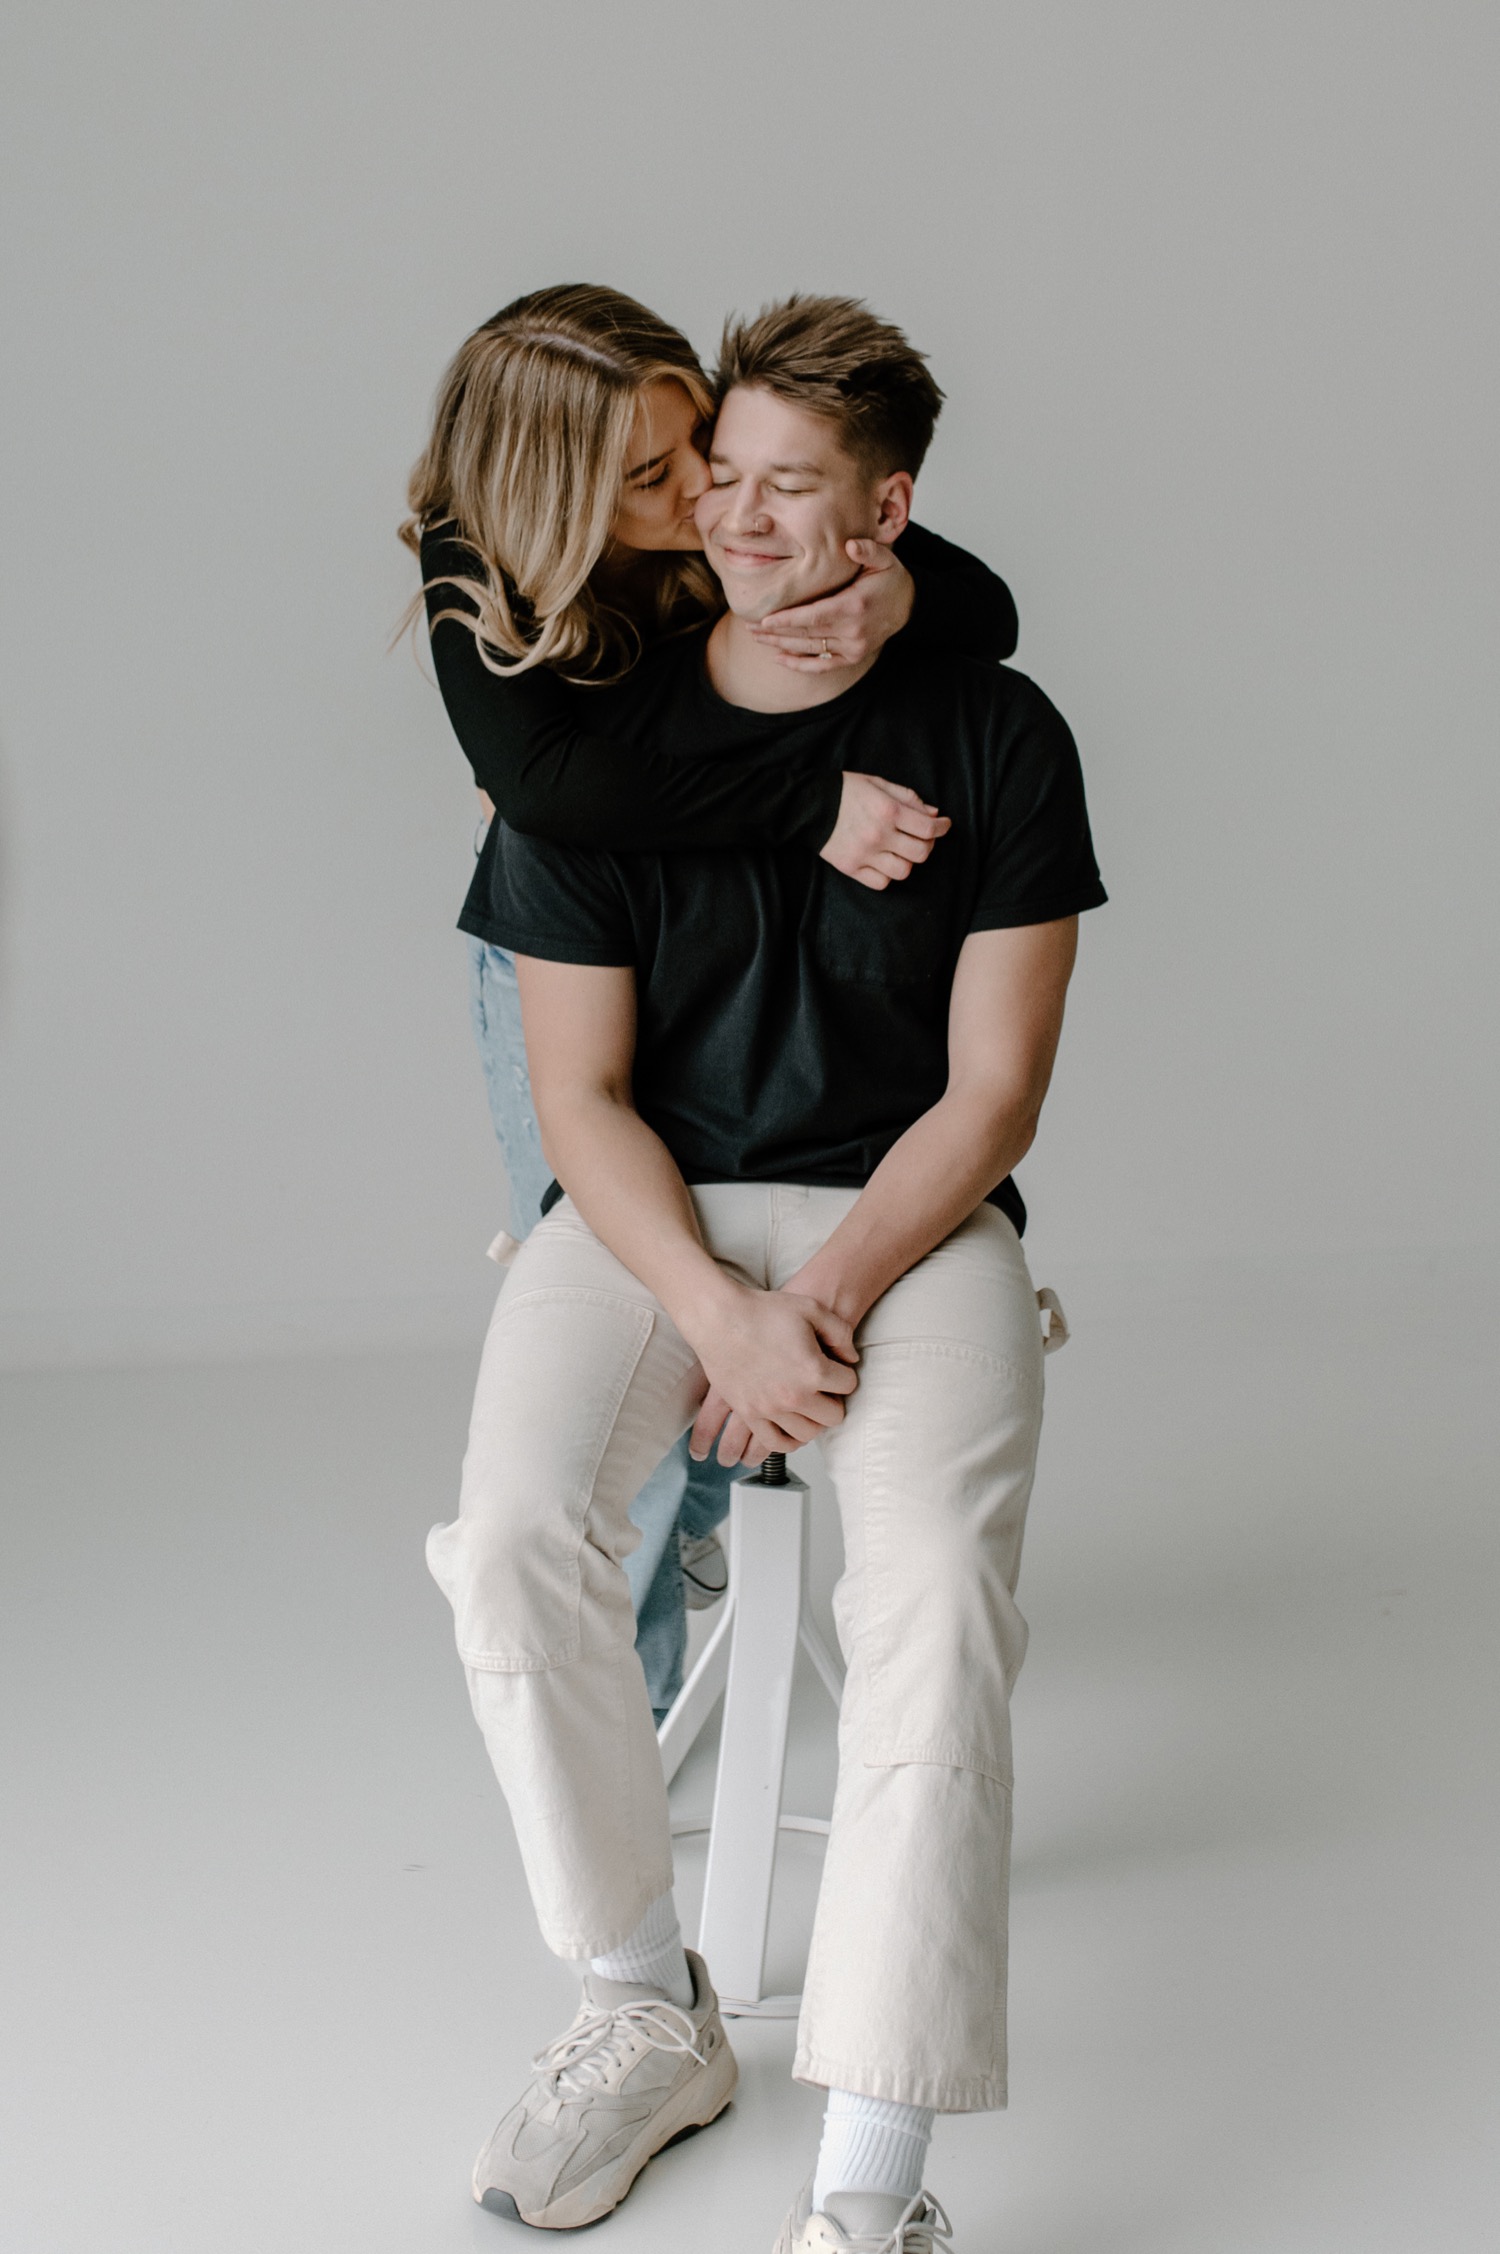 Quick and Easy Poses for any Couple During a Photoshoot